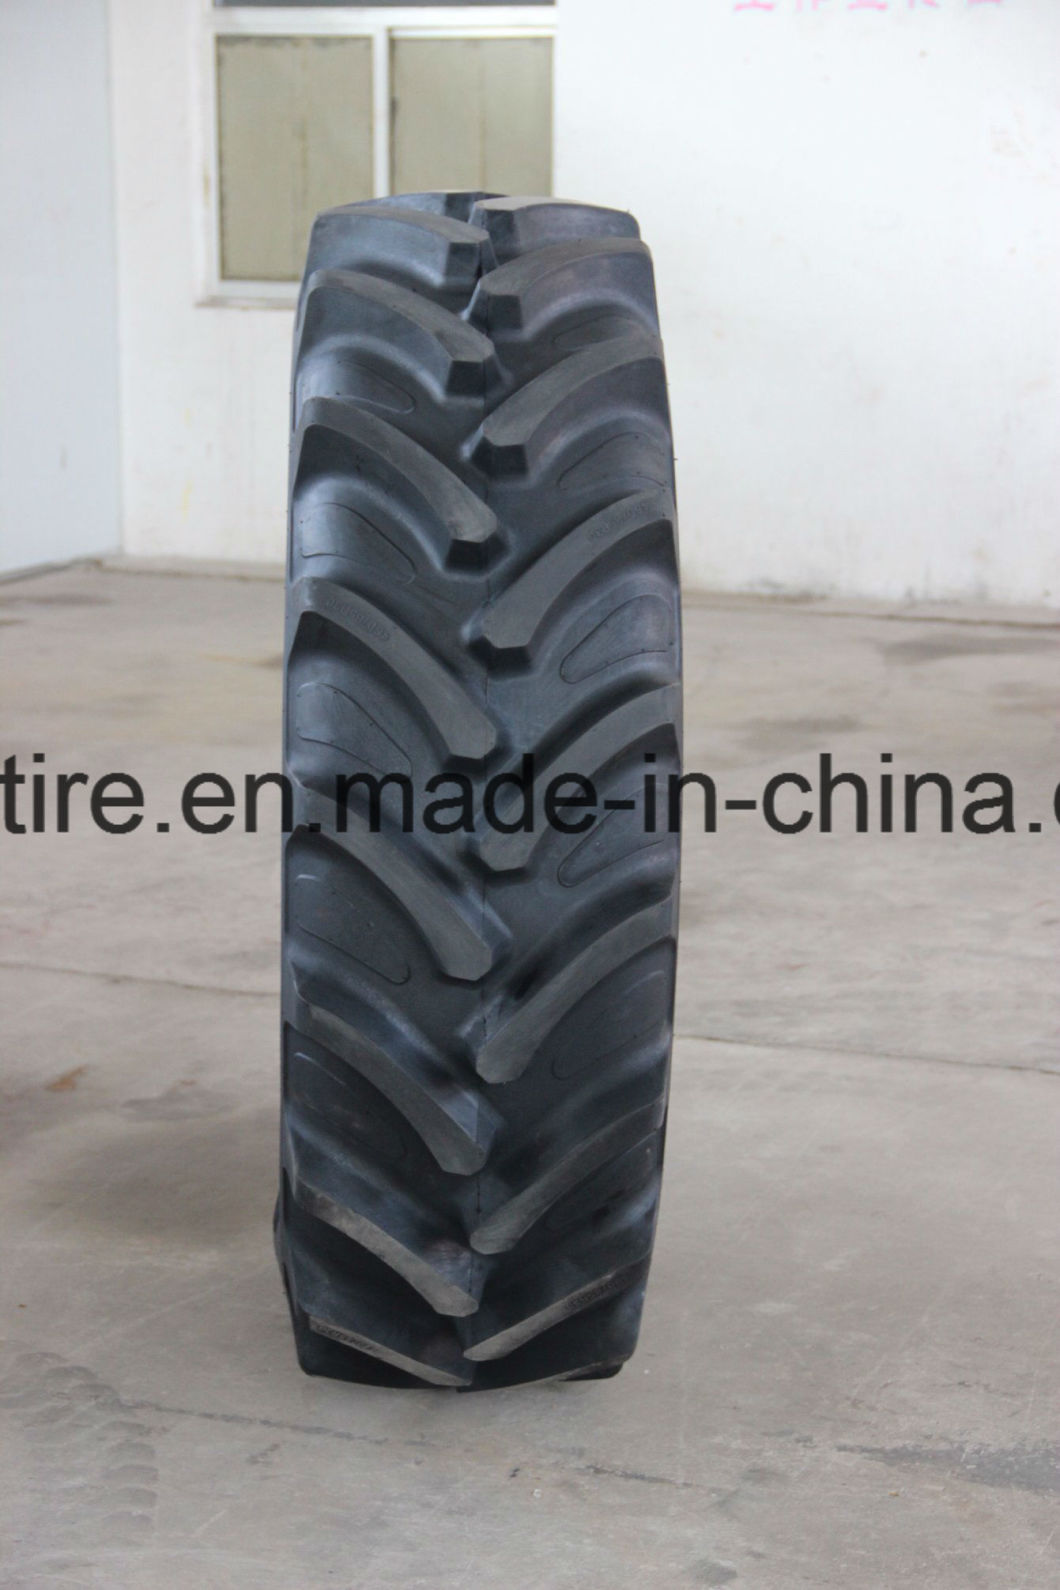 Sale Chinese Radial Tire Supplier 460/85r34 18.4r34 Radial Agriculture Tires Price